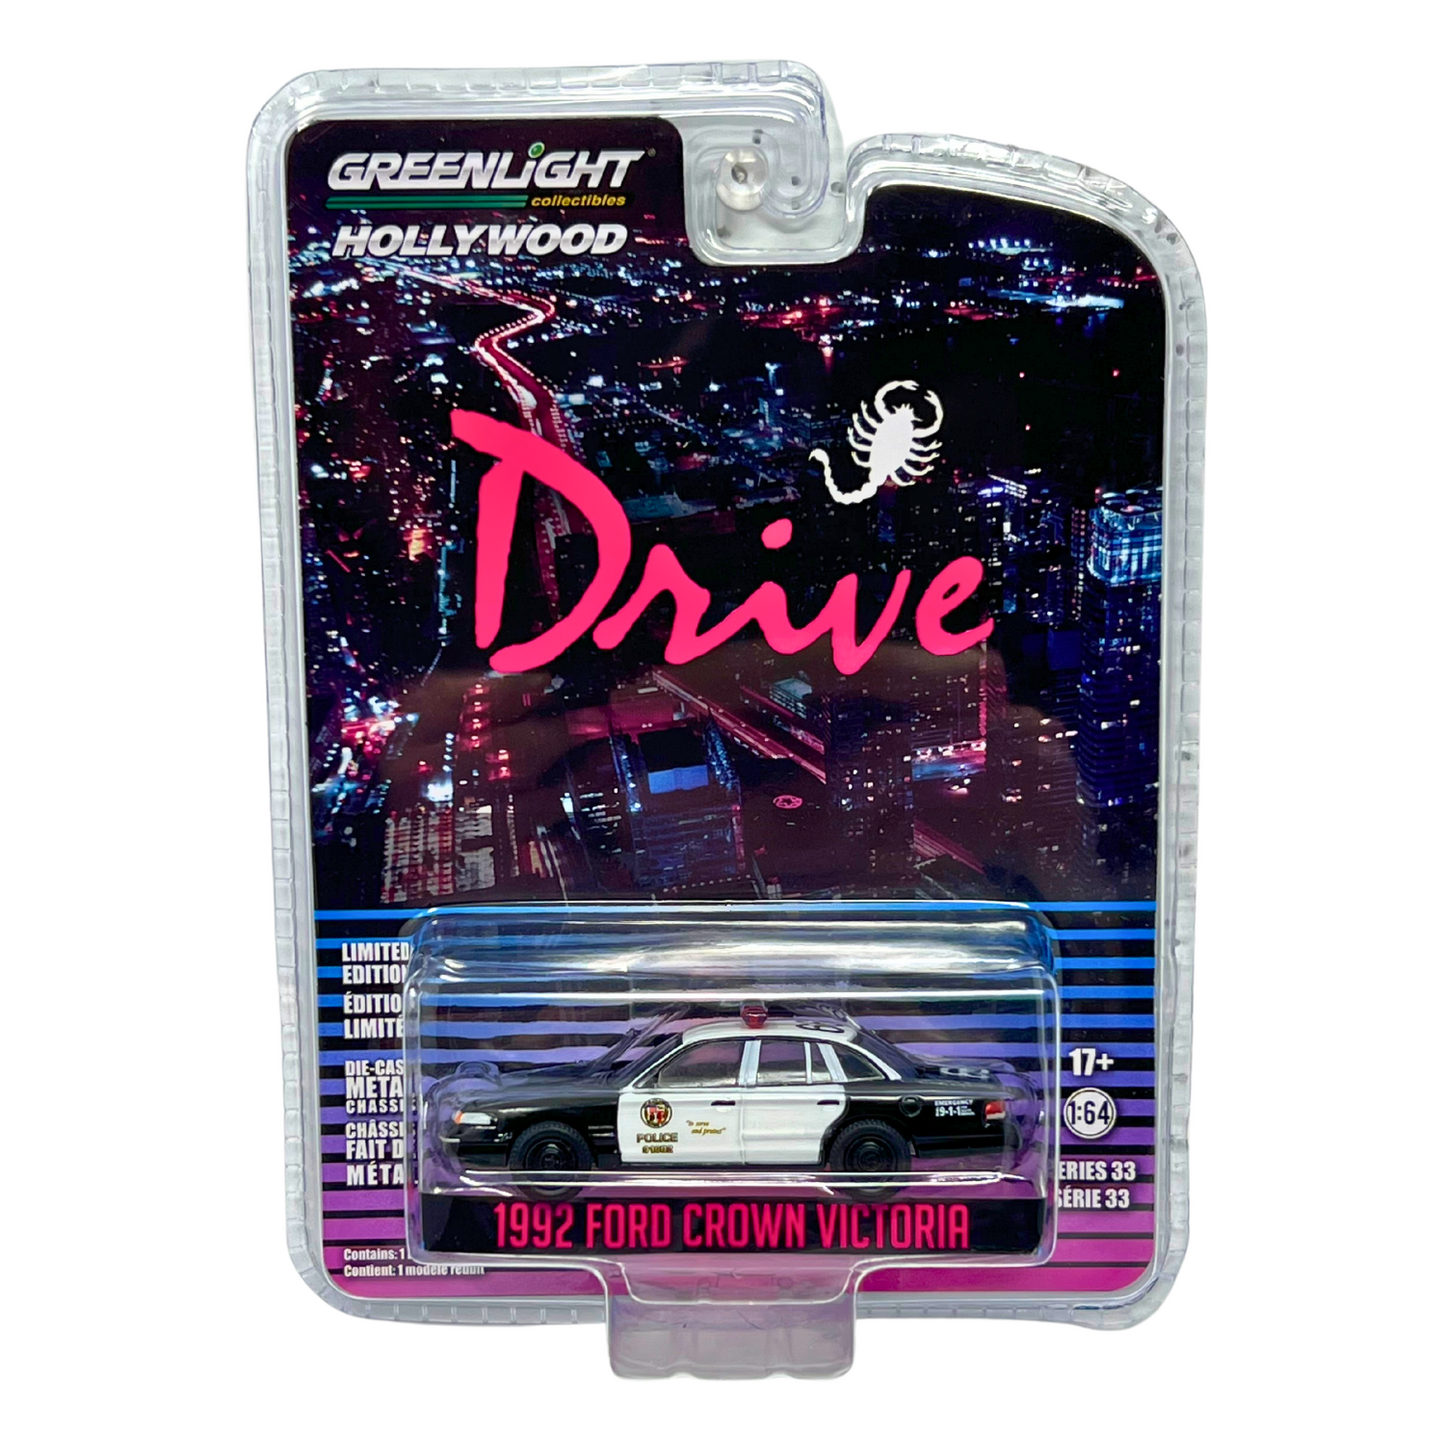 Greenlight Hollywood Drive 1992 Ford Crown Victoria 1:64 Diecast